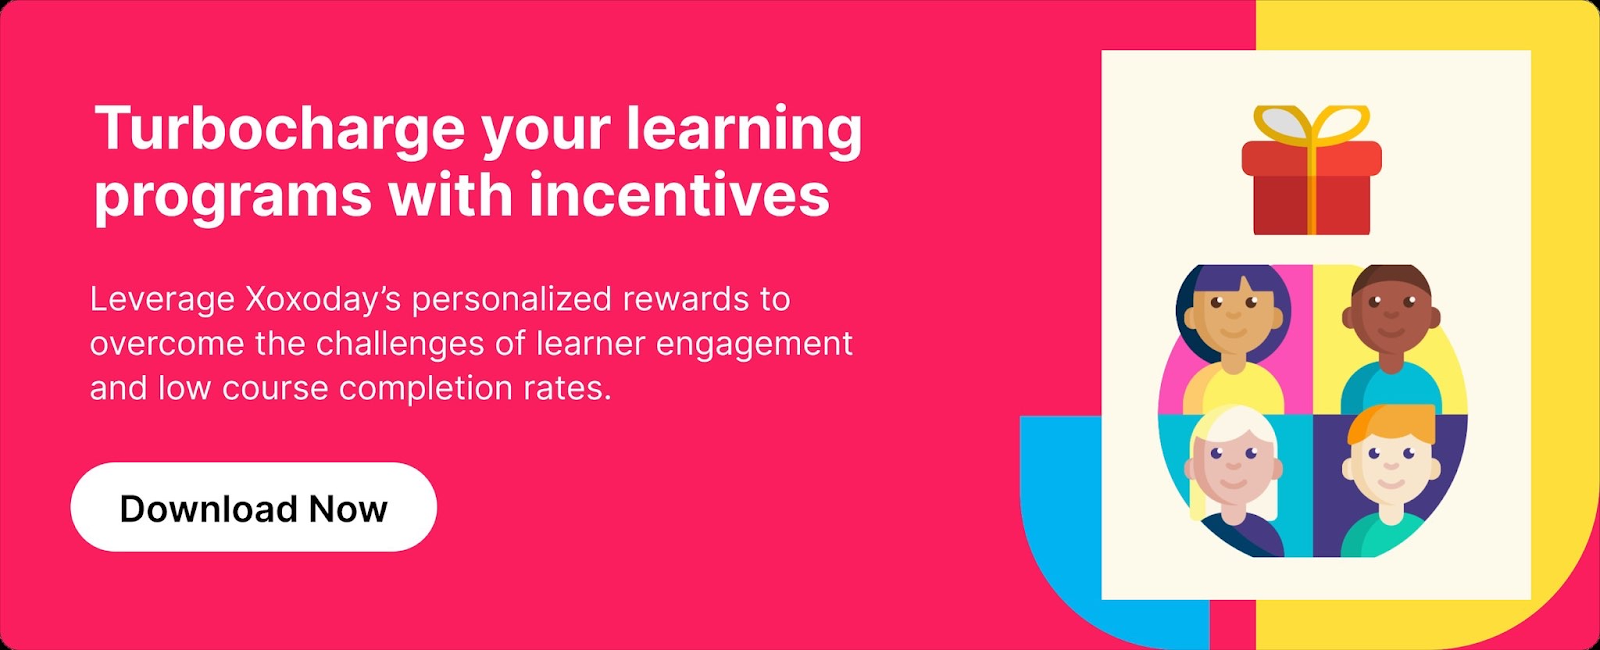 turbocharge your learning programs with incentives